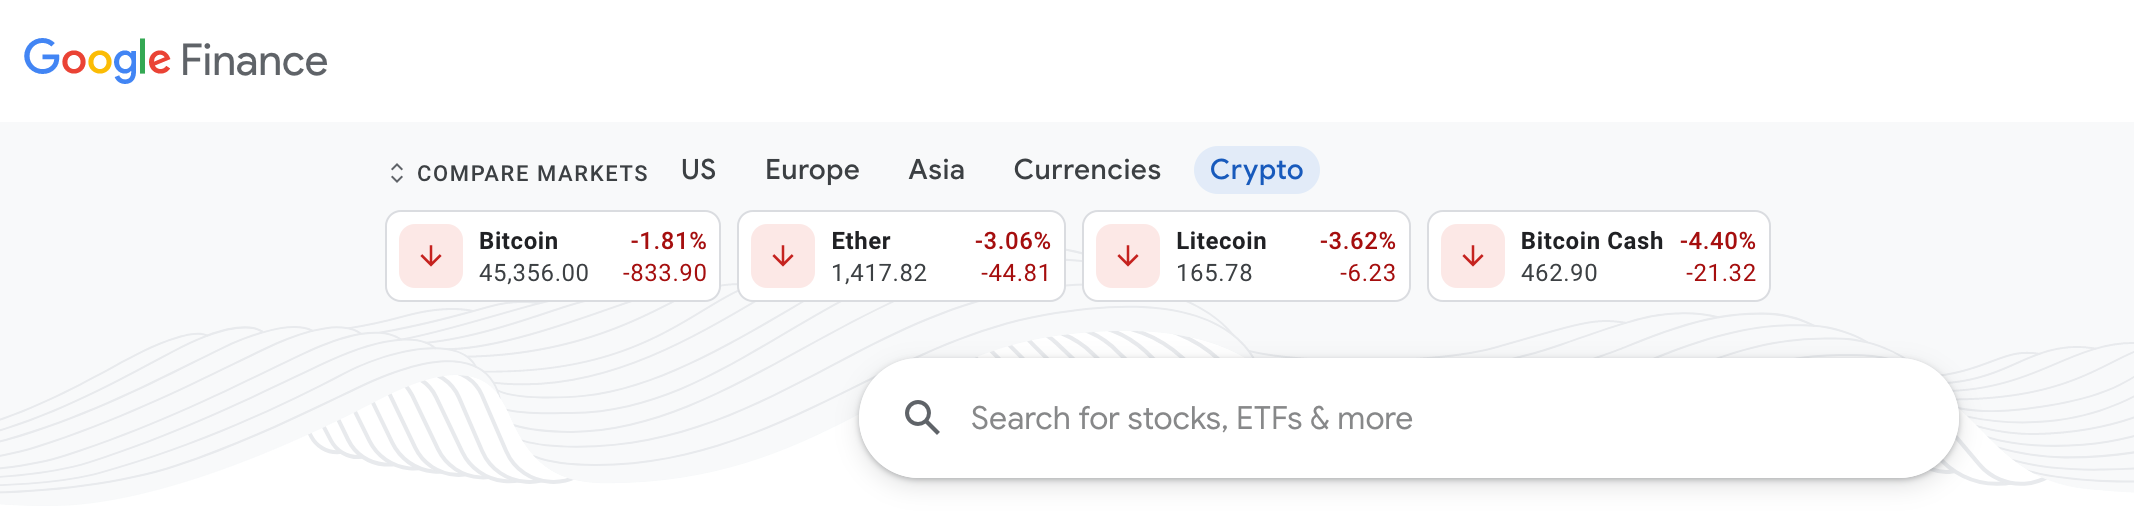 Google Finance Adds Dedicated ‘Crypto’ Tab Featuring Bitcoin, Ether, Litecoin